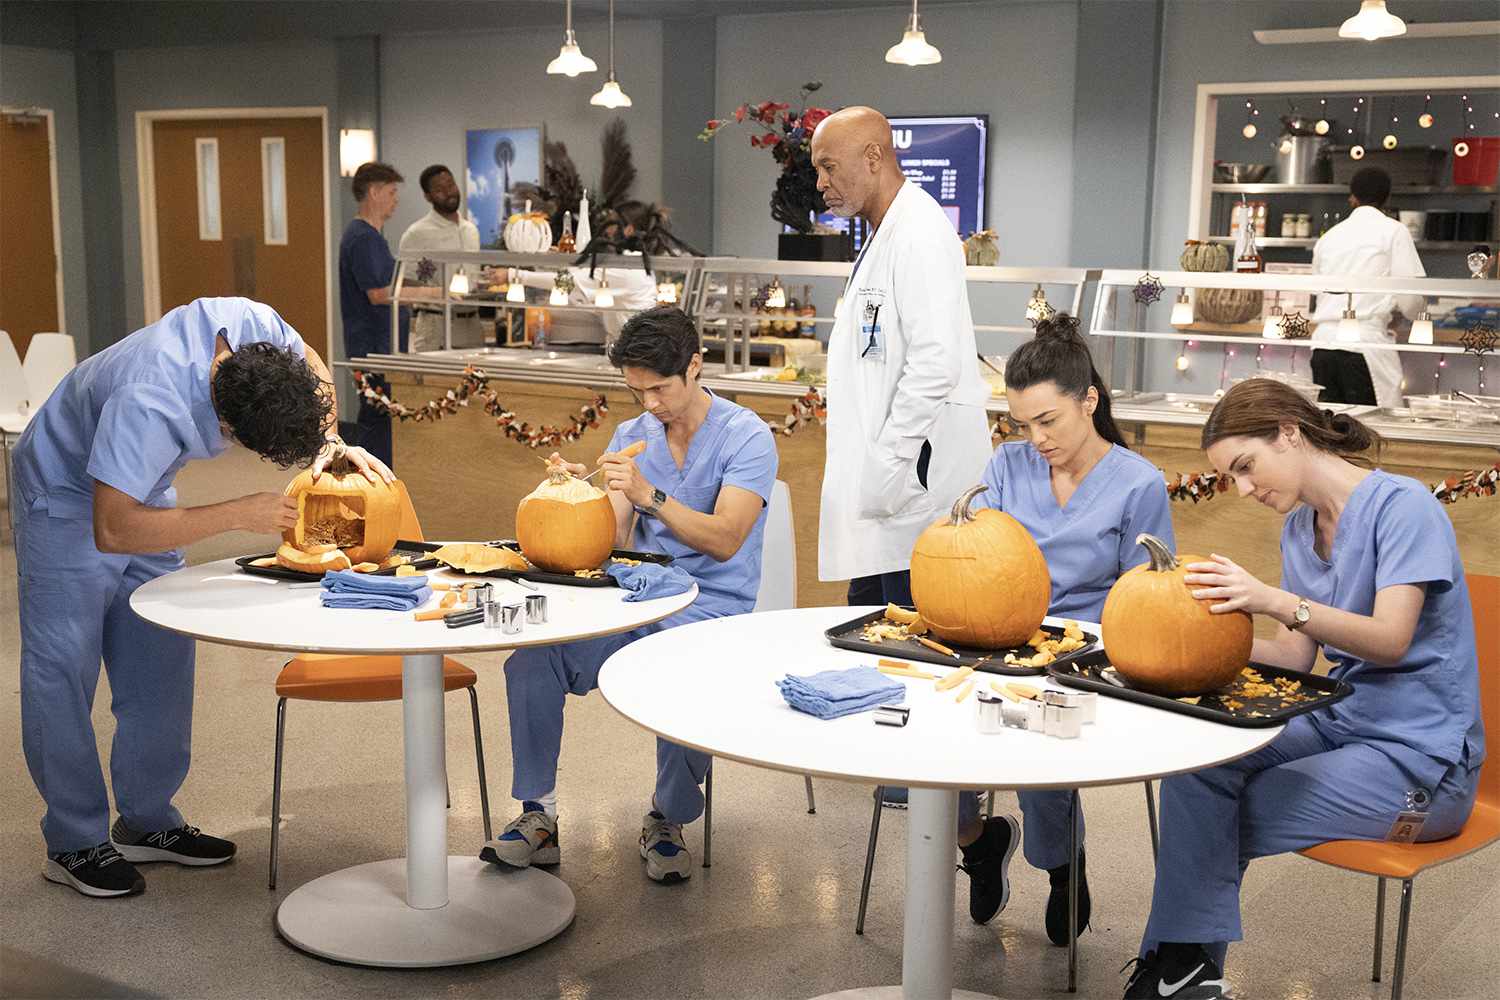 GREY’S ANATOMY - “Haunted” – It’s Halloween night at Grey Sloan Memorial. Meredith and Nick try to spend some alone time together; Levi is stressed due to overworking, and Winston and Owen have the interns practice trauma training on a real cadaver on a new episode of “Grey’s Anatomy,” THURSDAY, OCT. 27 (9:00-10:01 p.m. EDT), on ABC. (ABC/Liliane Lathan) HARRY SHUM JR., JAMES PICKENS JR., NIKO TERHO, ADELAIDE KANE